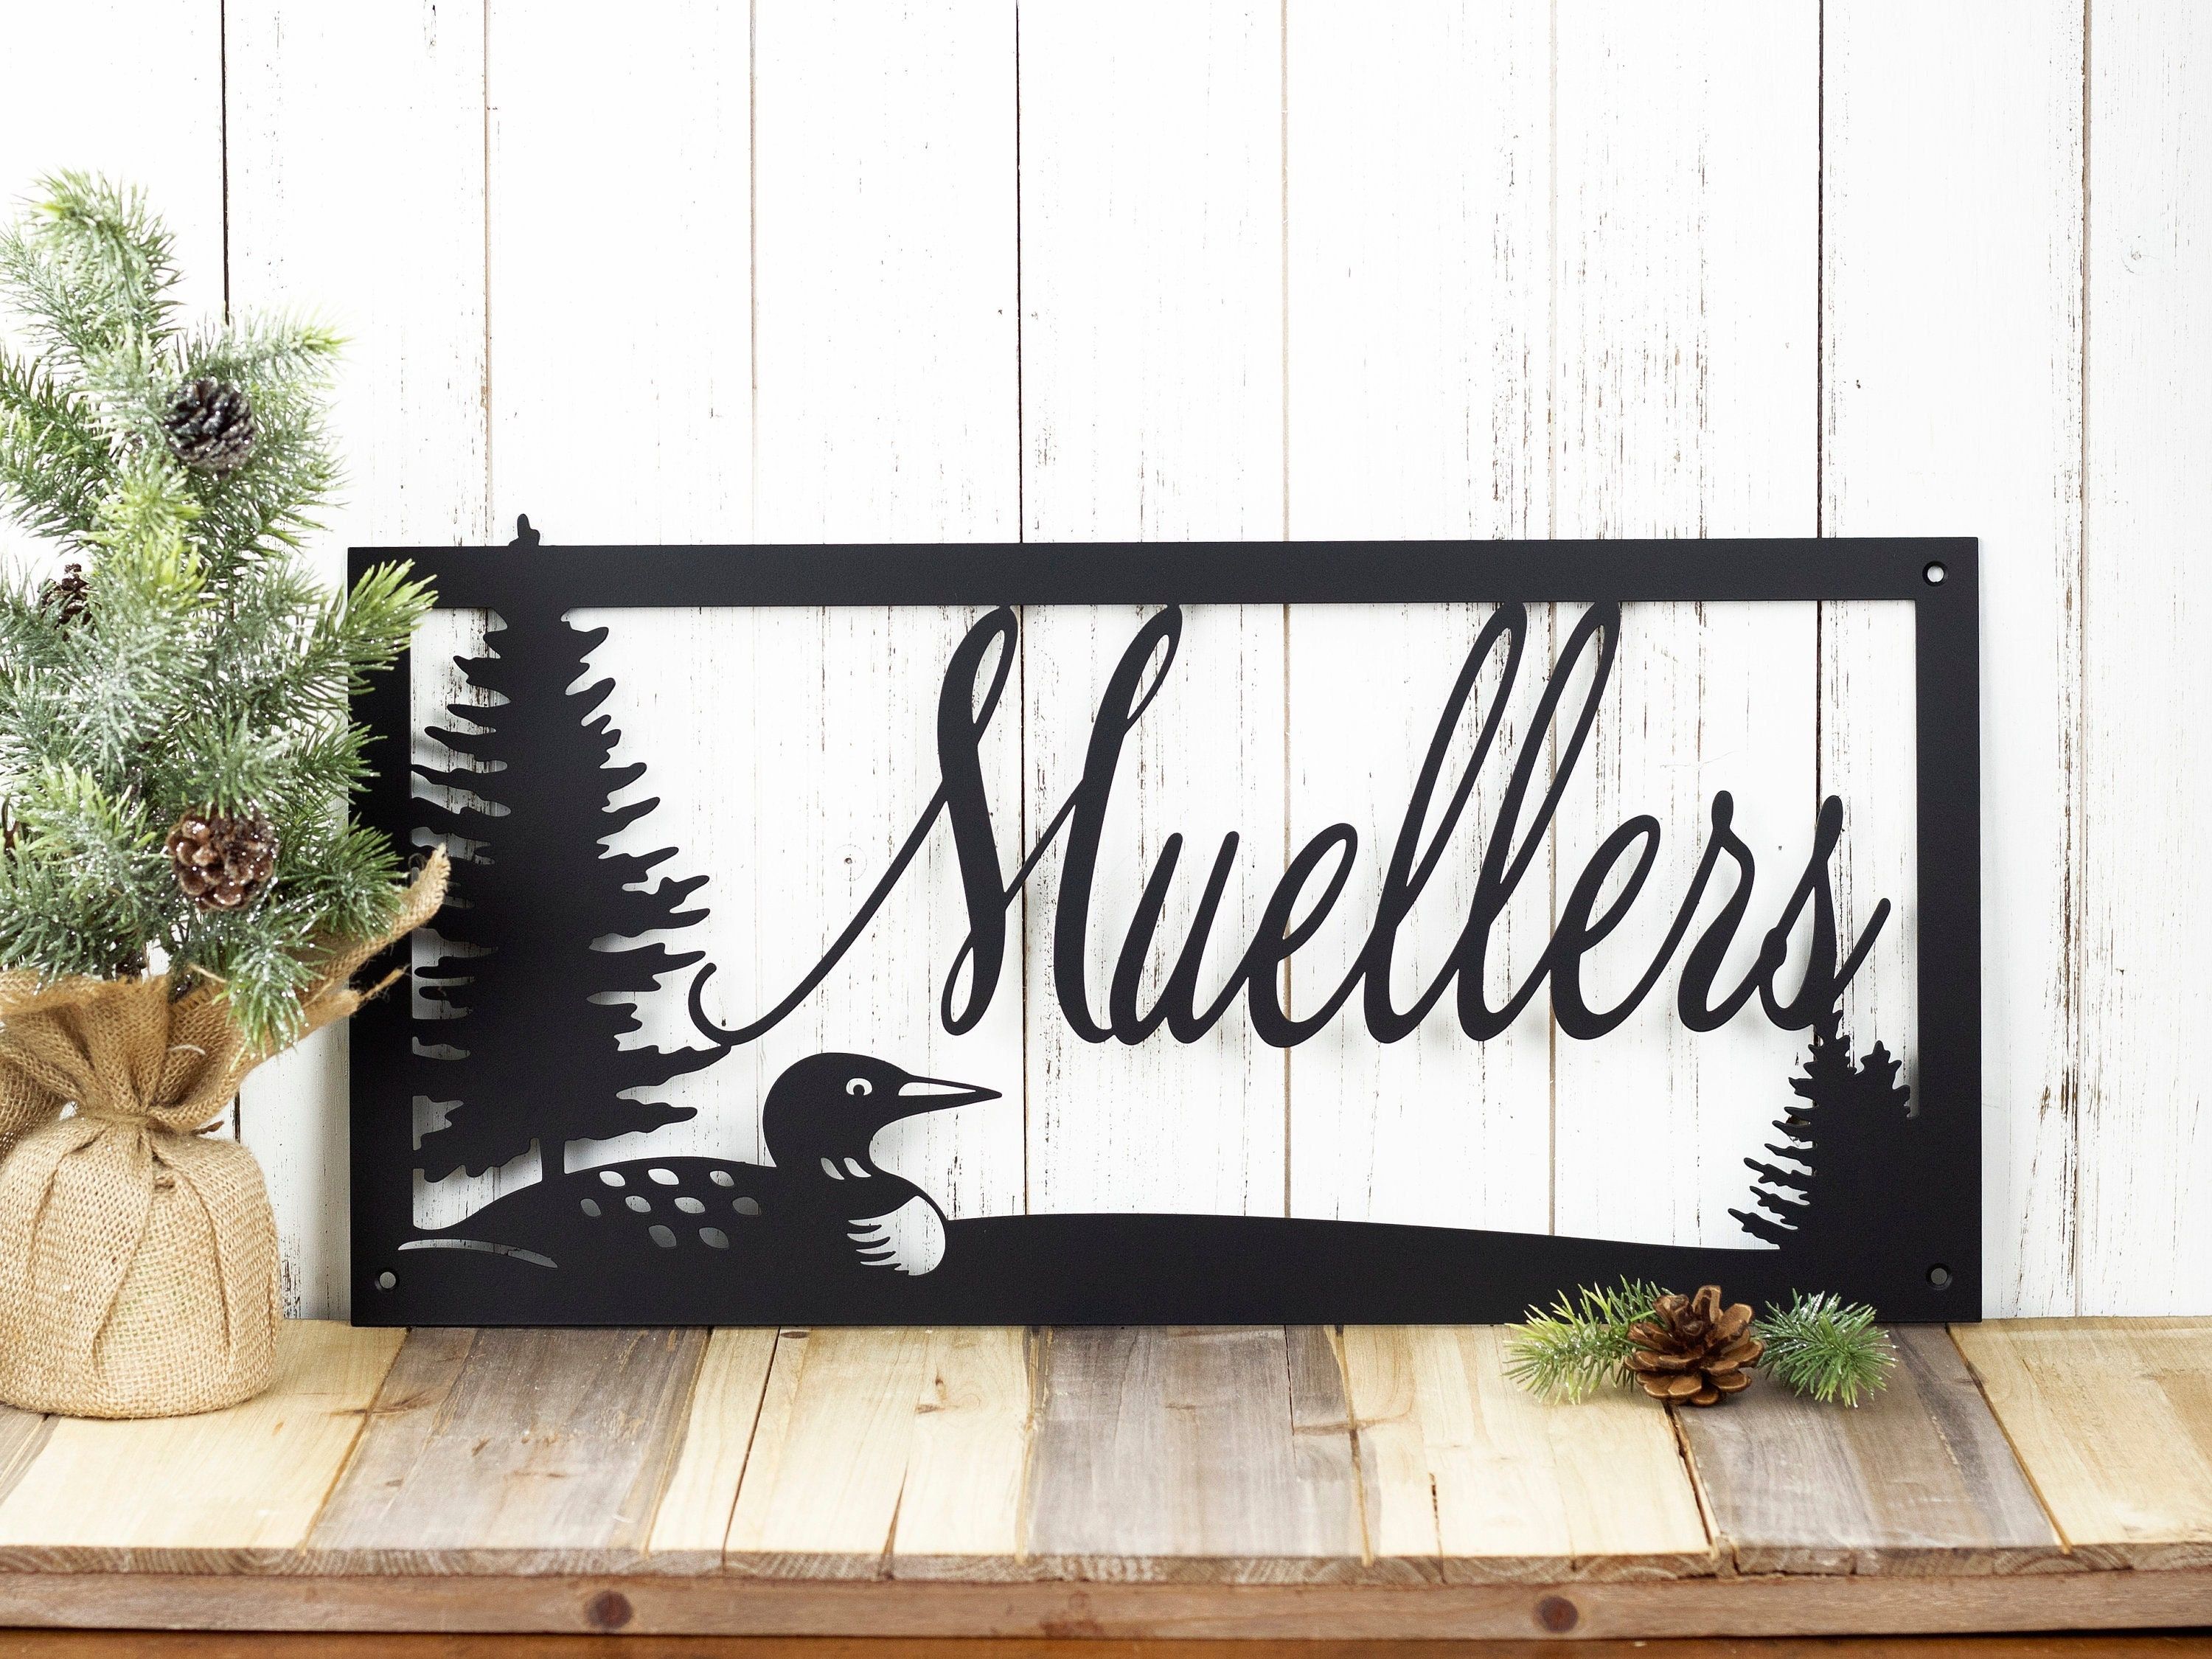 Custom Outdoor Family Last Name Metal Sign With Loon, Family Name Sign,  Custom Sign, Metal Wall Art Regarding Most Recent Family Wall Sign Metal (View 19 of 20)